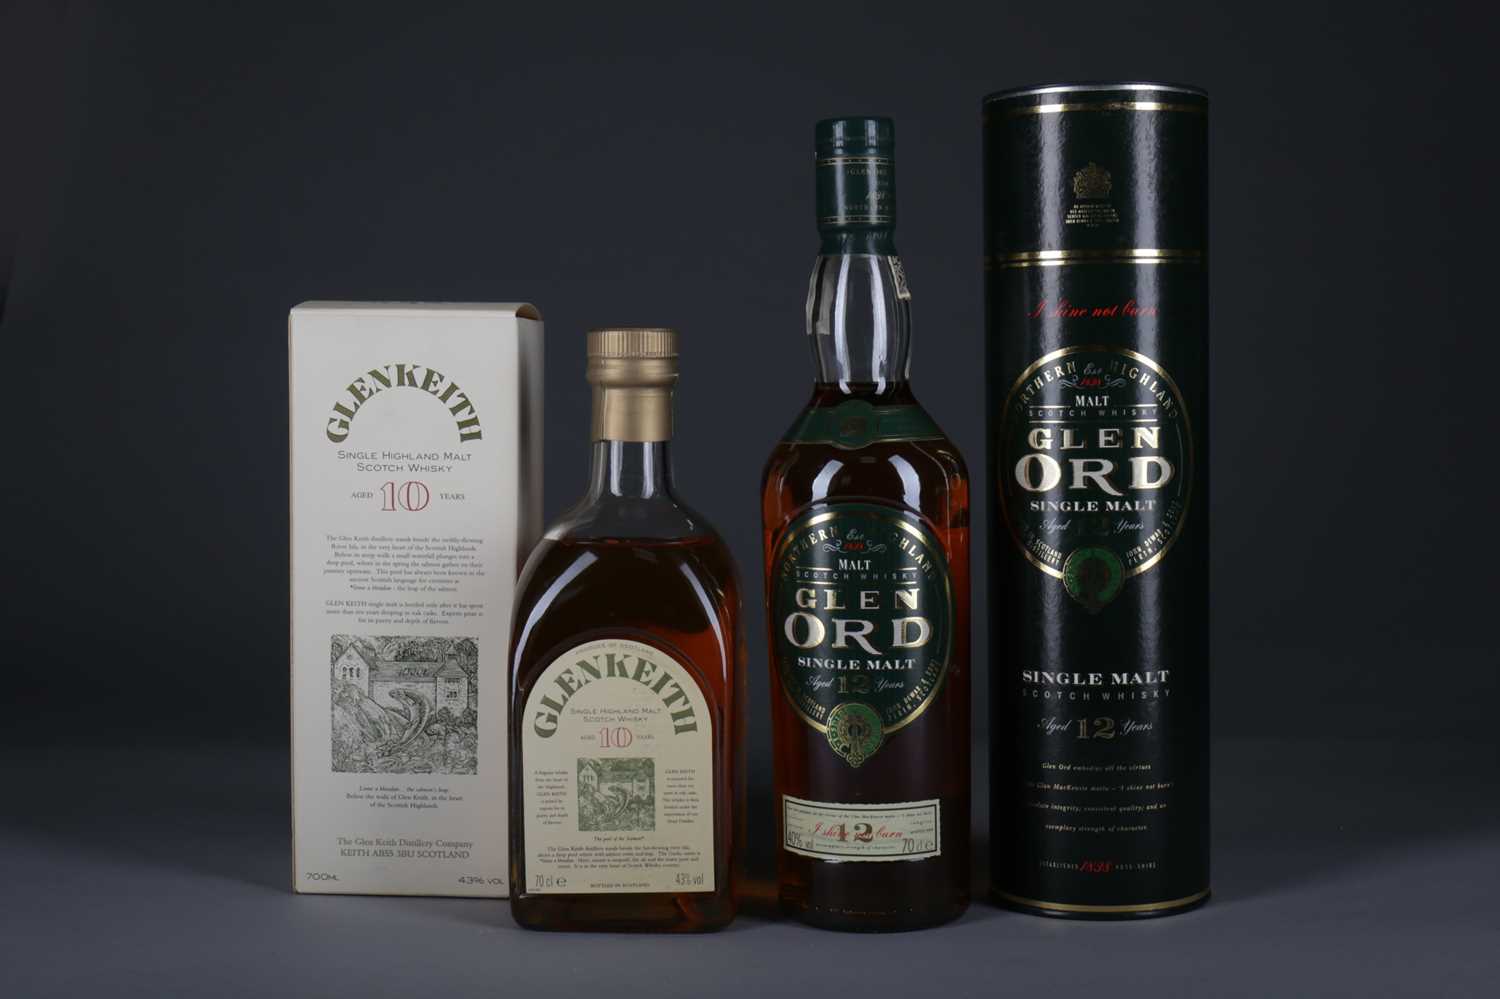 Lot 1387 - GLEN ORD AGED 12 YEARS AND GLEN KEITH AGED 10 YEARS